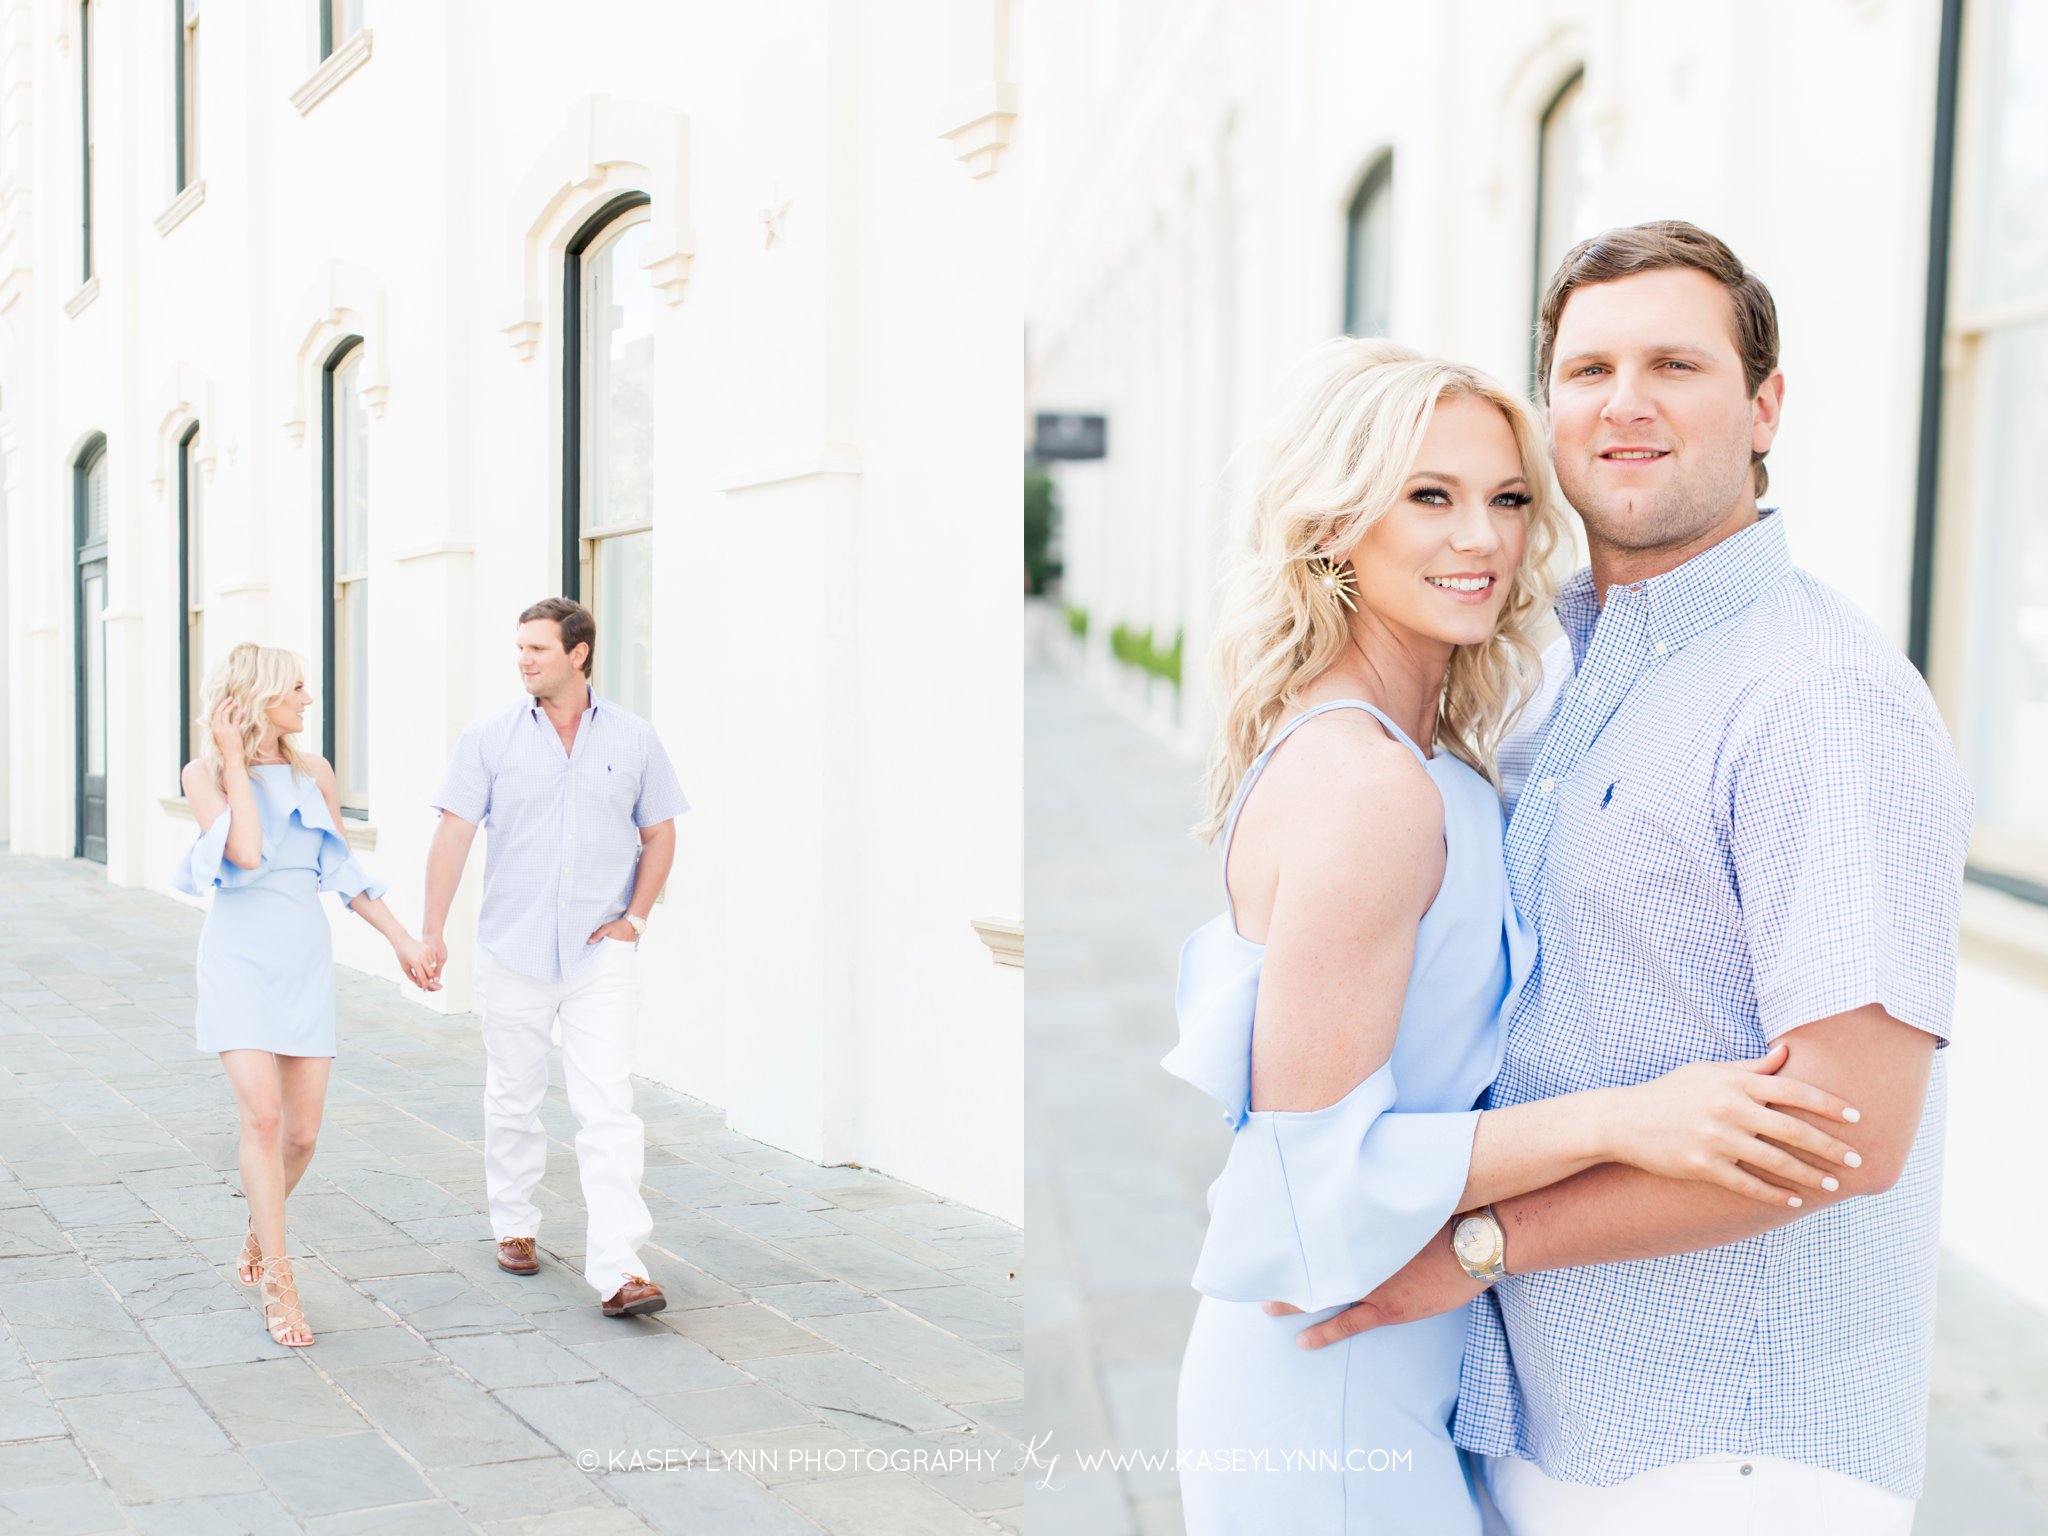 Tremont House Engagement Session / Kasey Lynn Photography